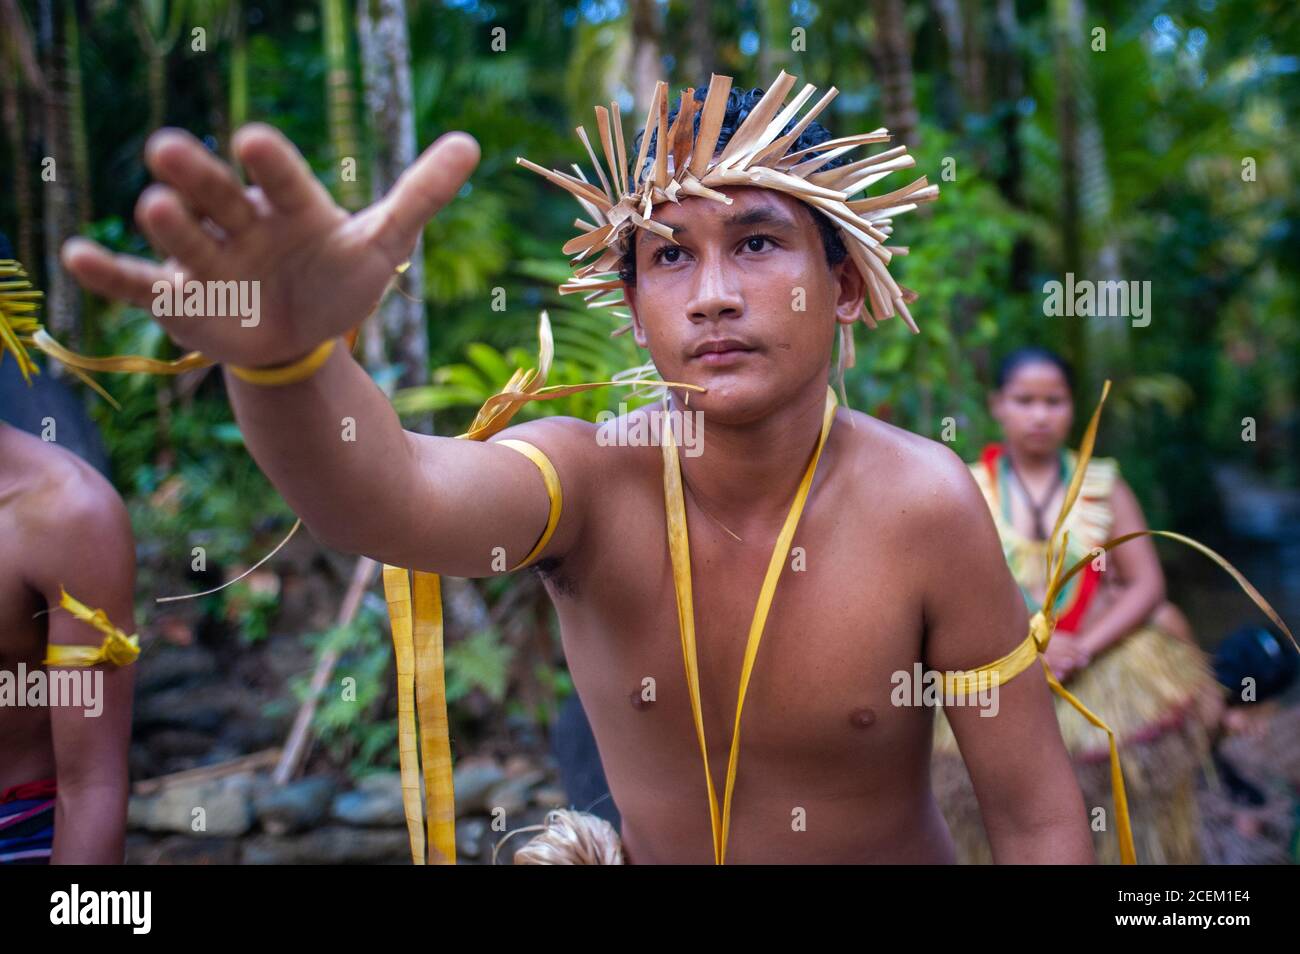 Native Dancer on The Islands of Yap Stock Photo